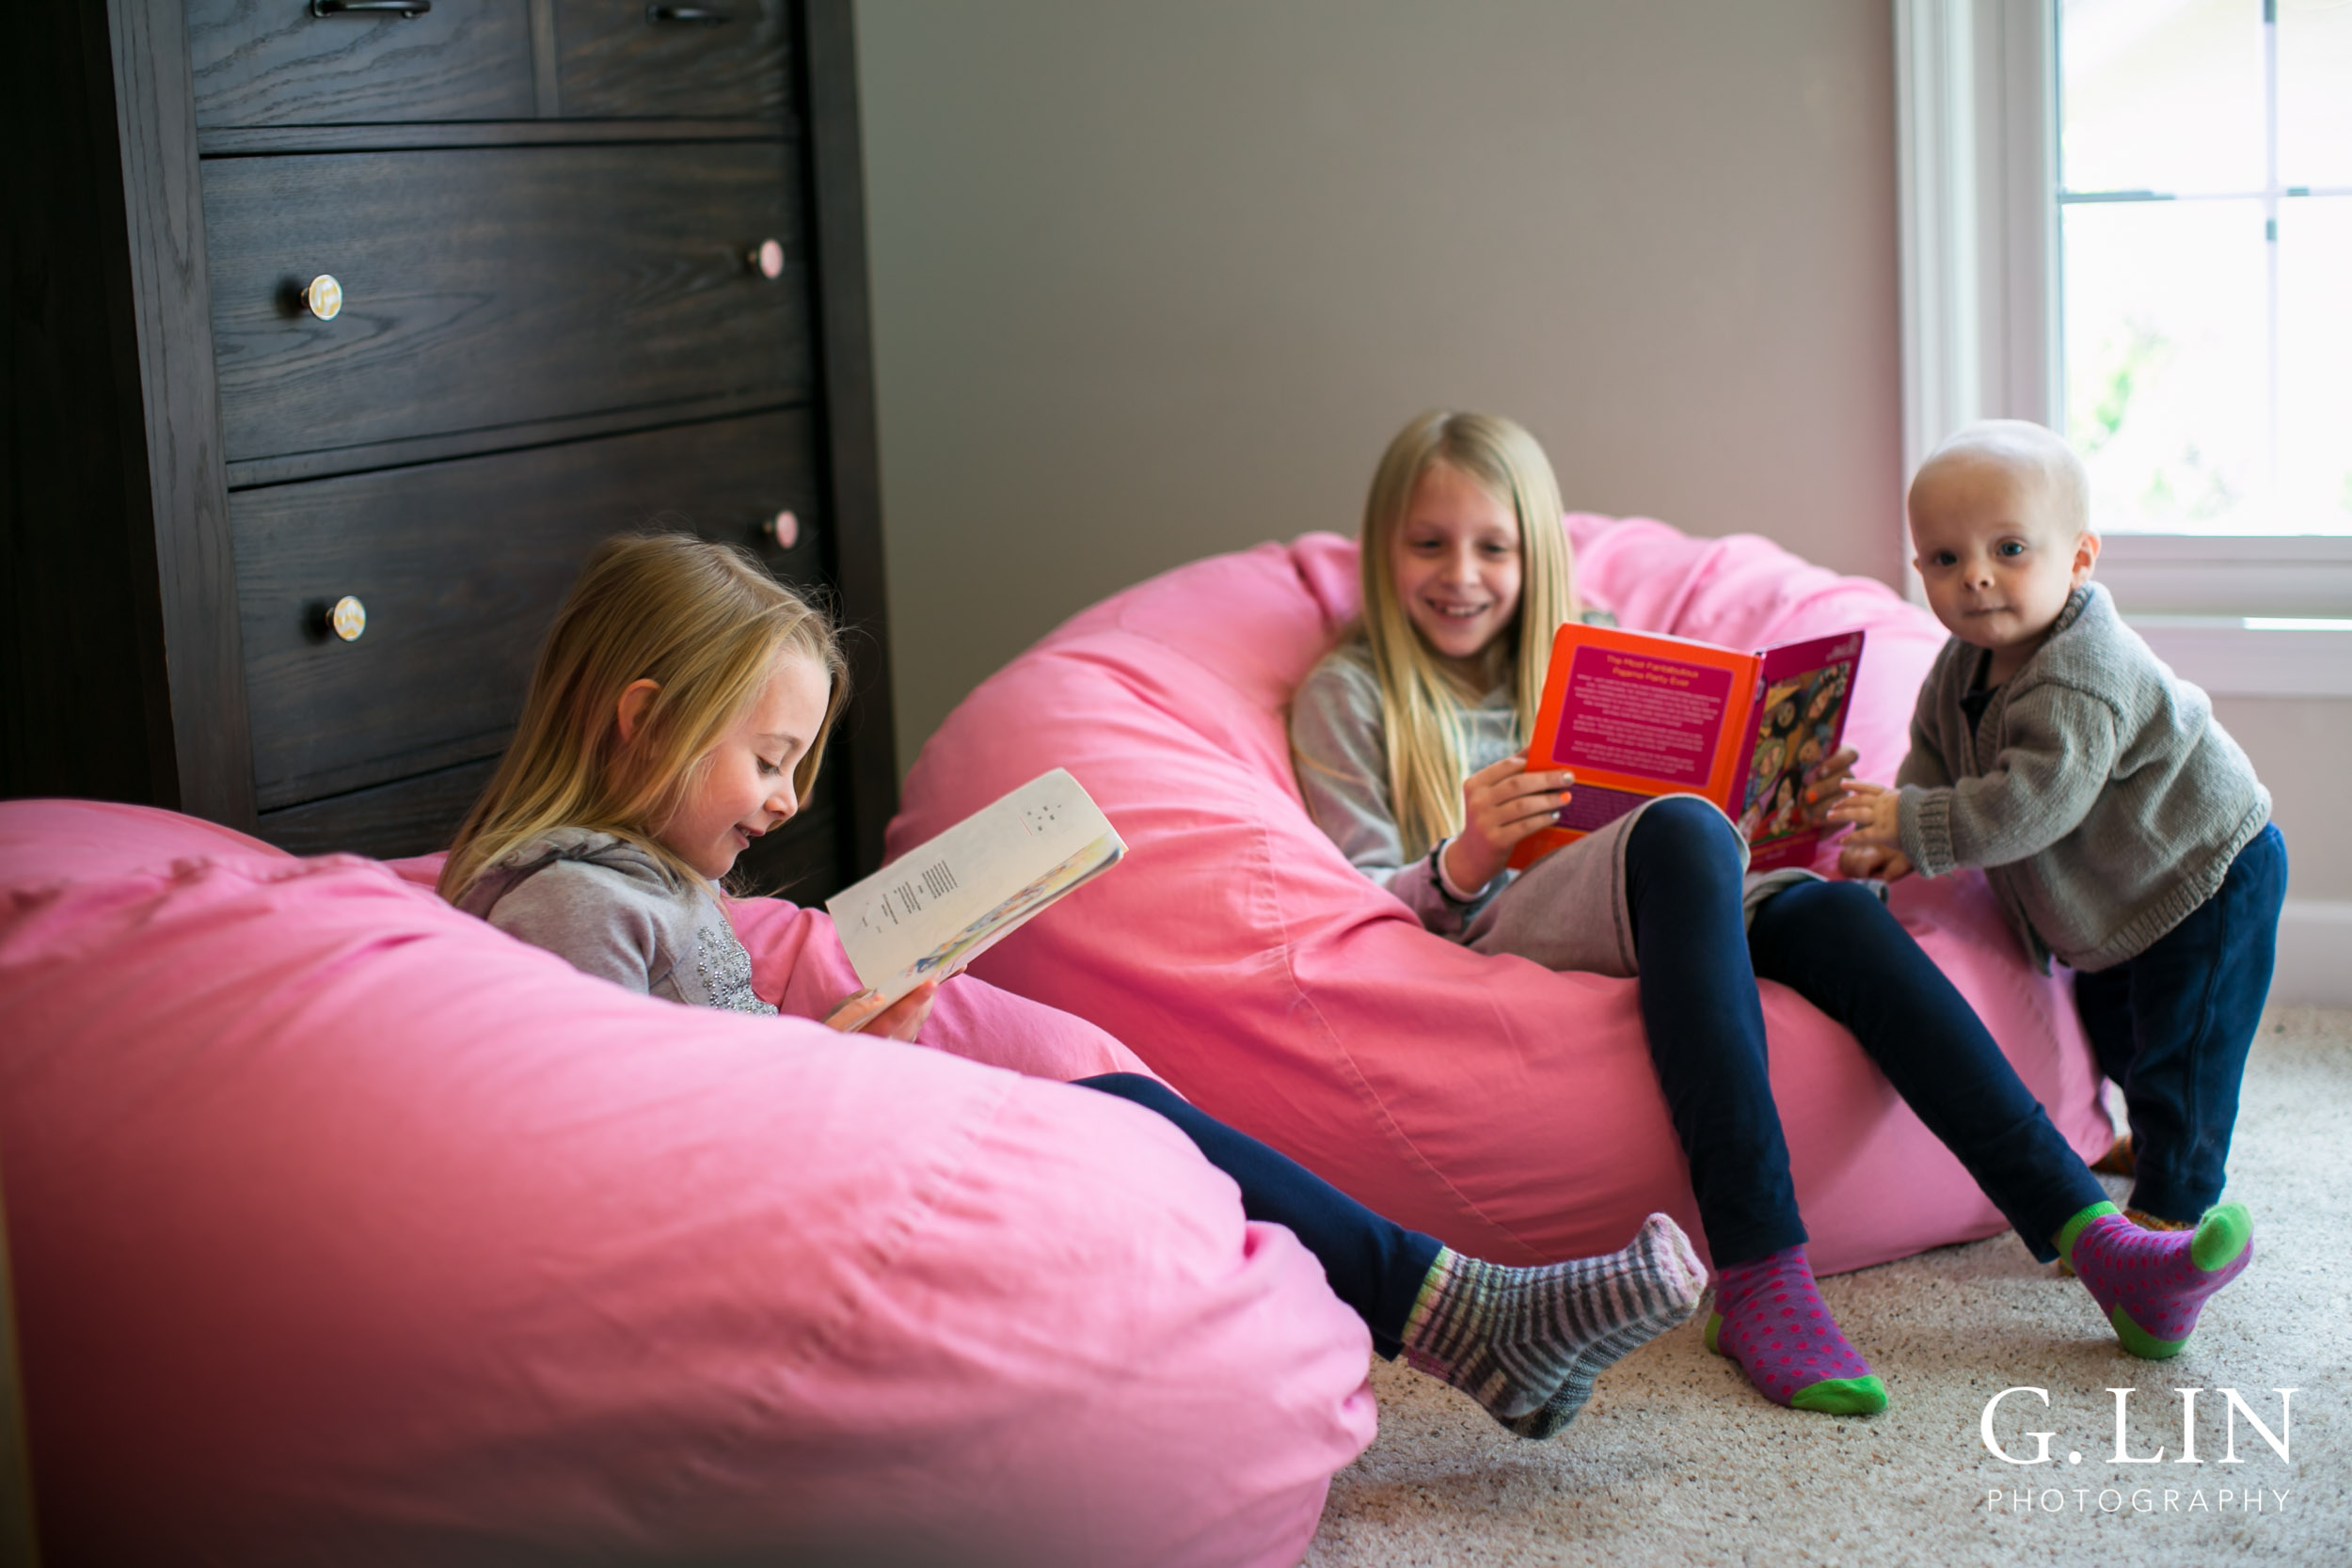 Raleigh Family Photographer | G. Lin Photography | Children sitting on bean bags and reading